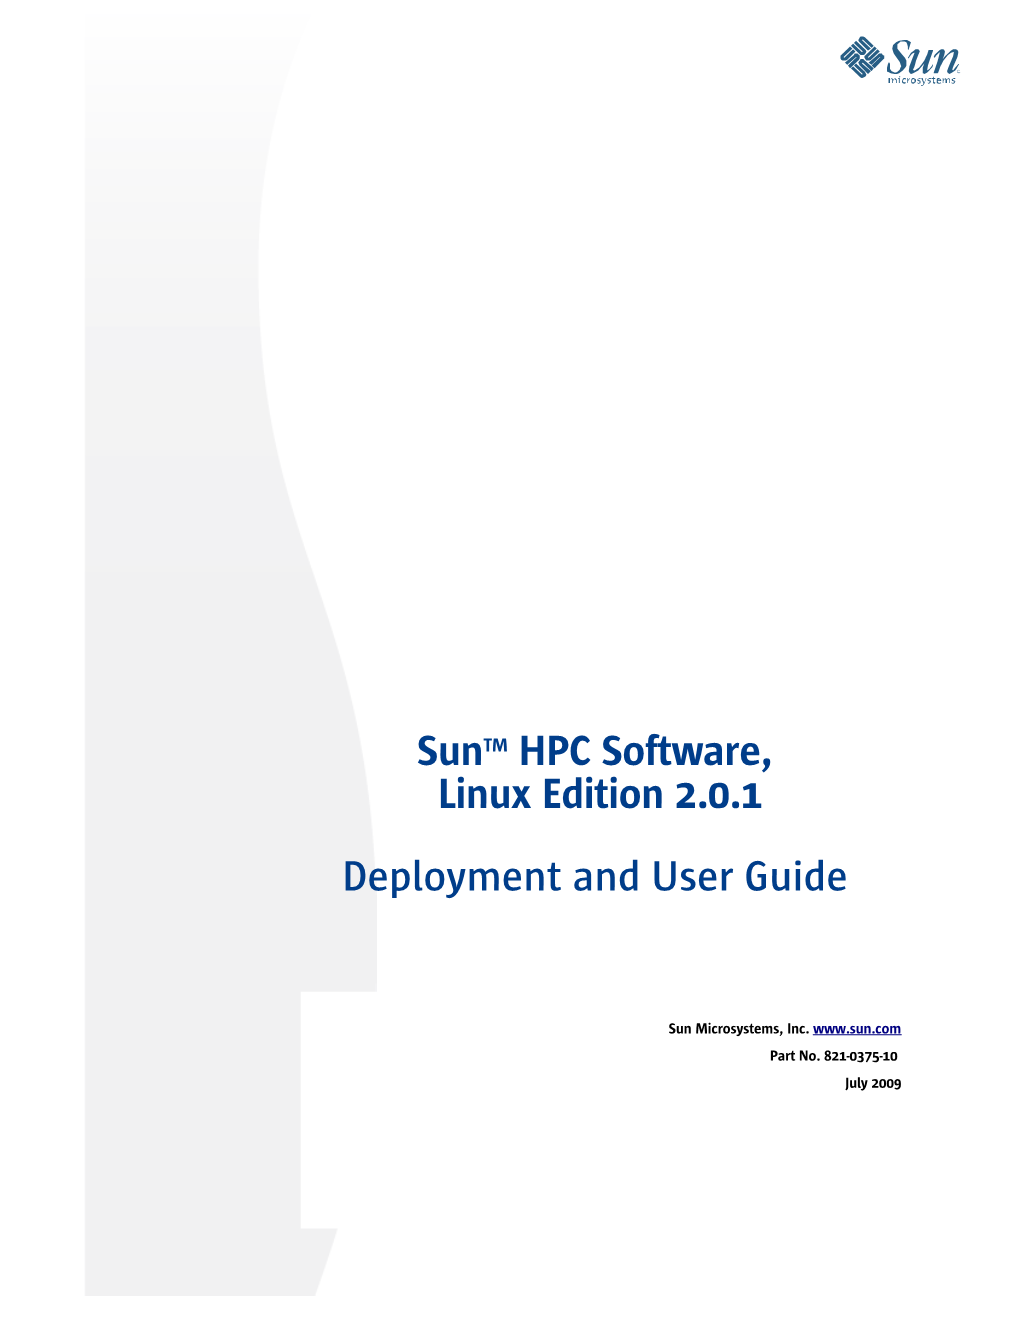 Sun HPC Software, Linux Edition 2.0.1, Deployment and User Guide